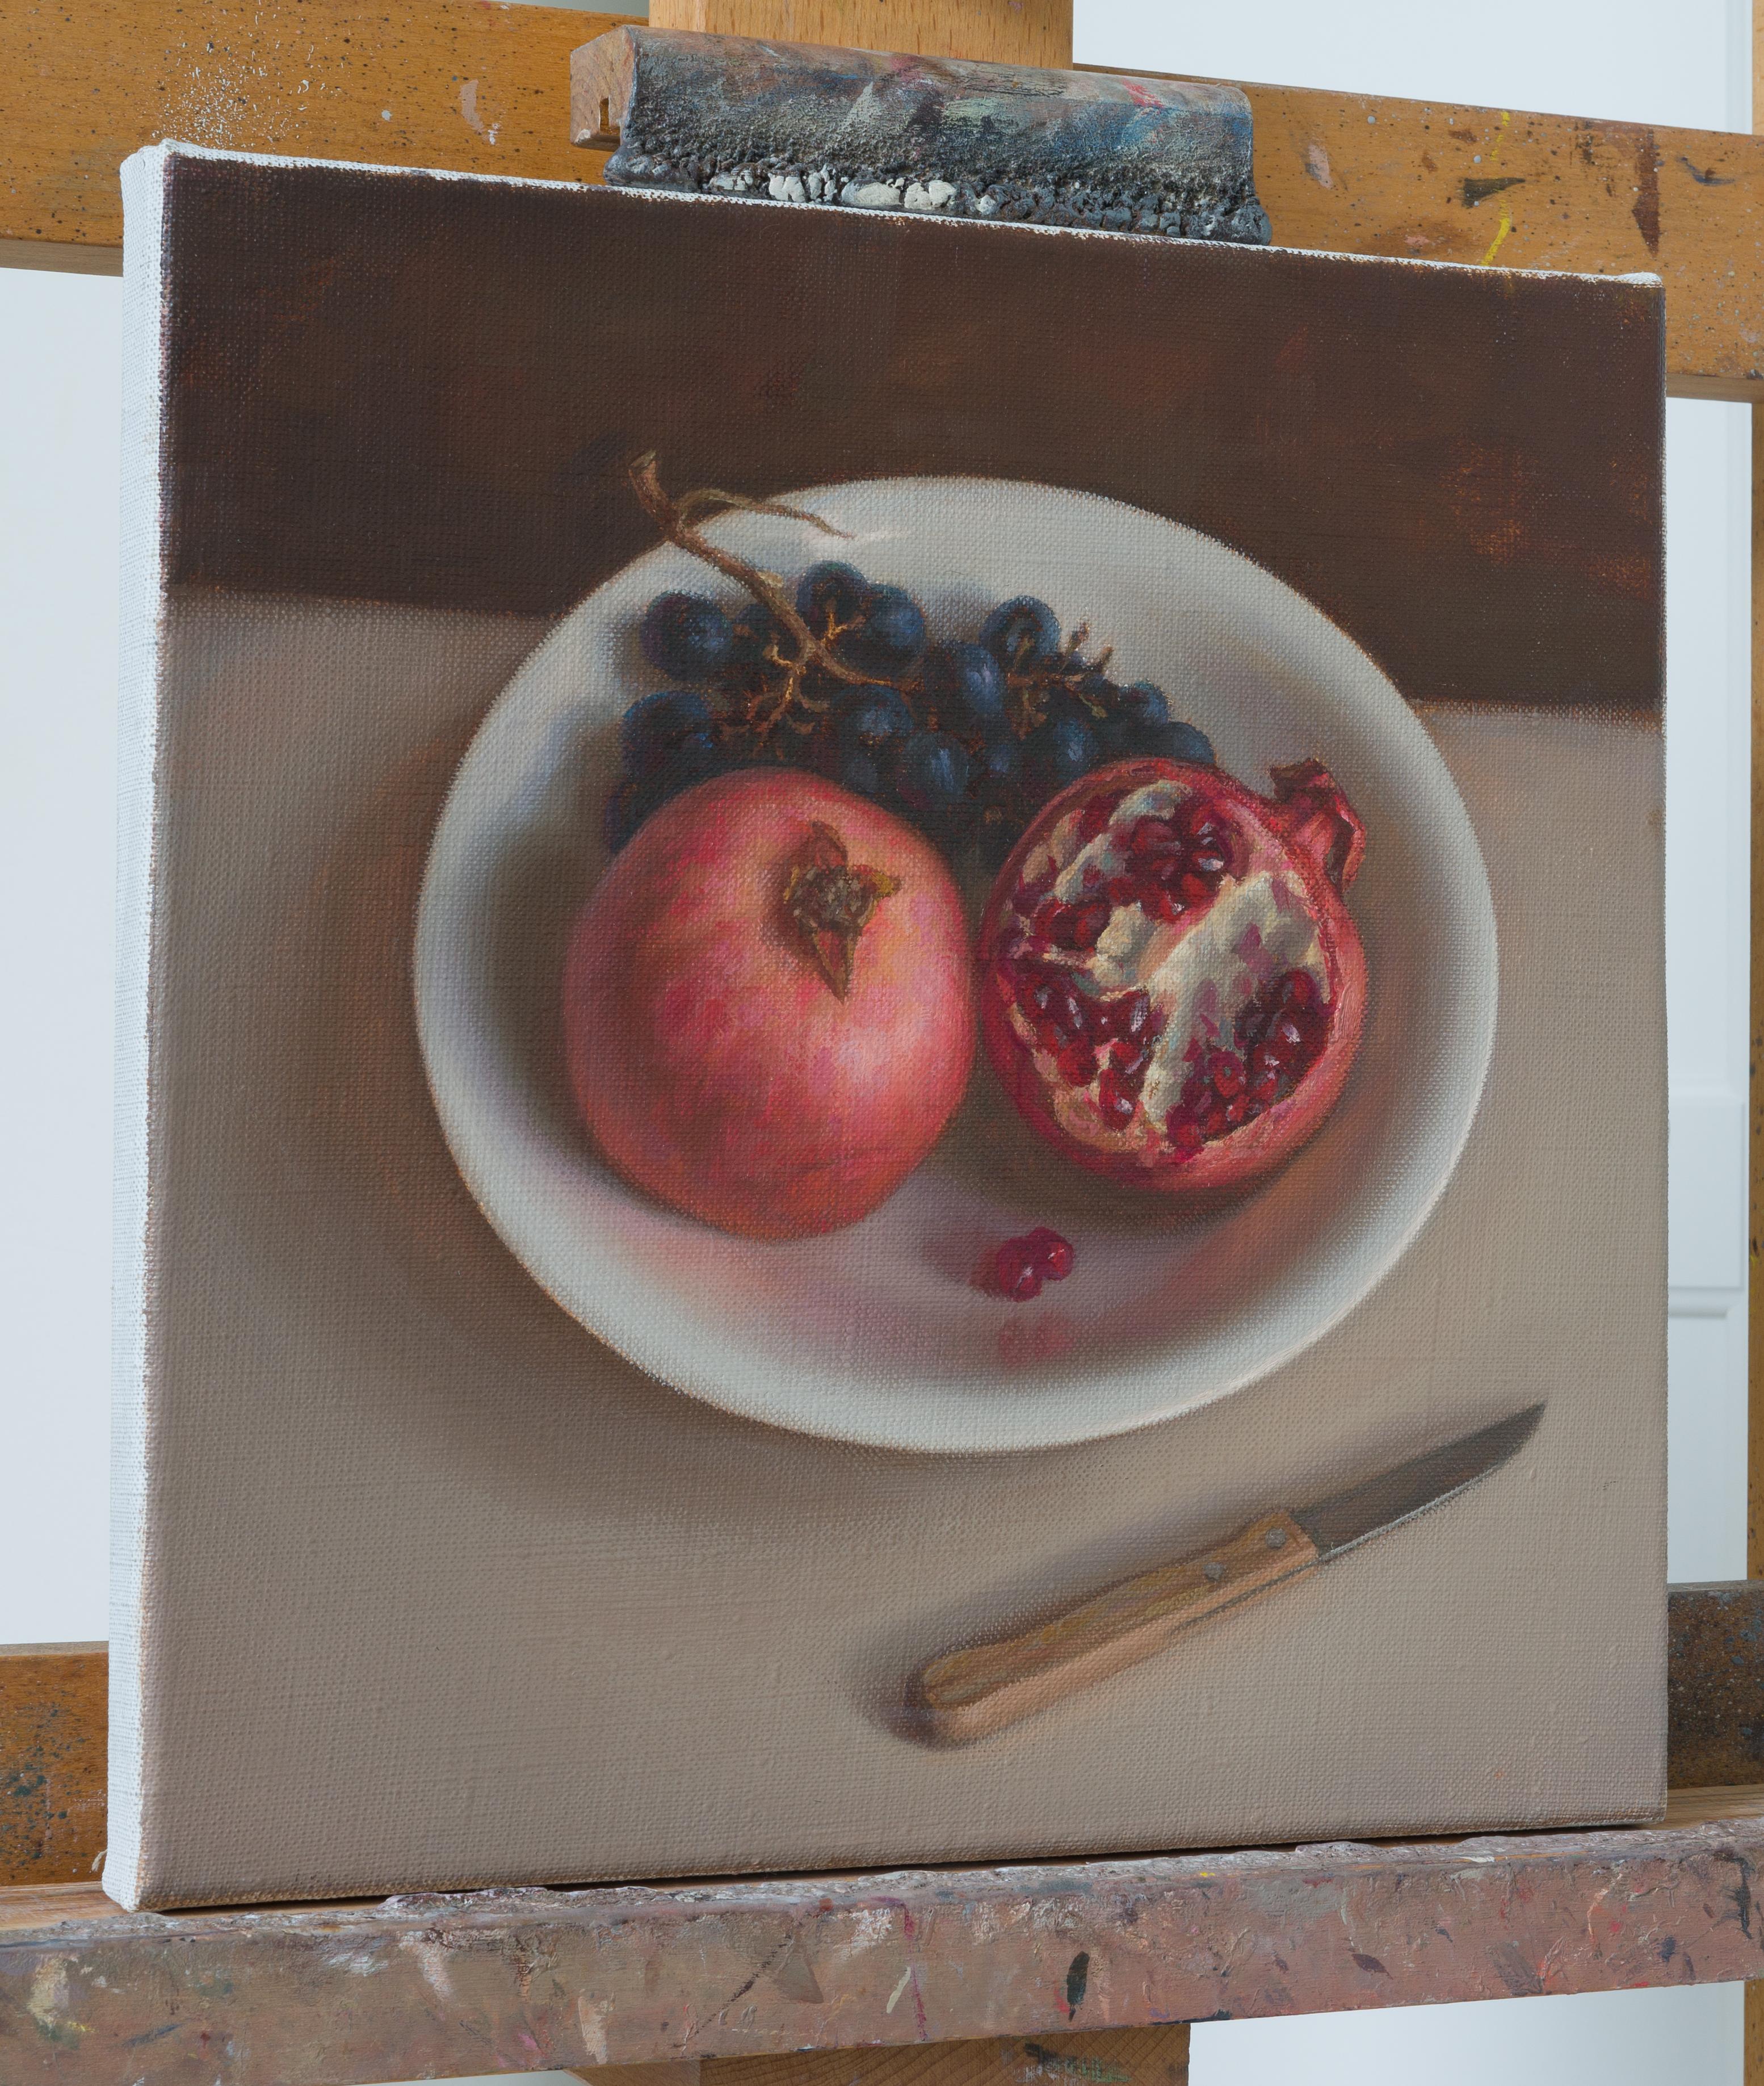 One of the works in a series of small still lives to play with form, color and texture. The beautiful color of pomegranates and their texture inspired me to create this work. The work is painted from life. The edges of the canvas are painted, it’s